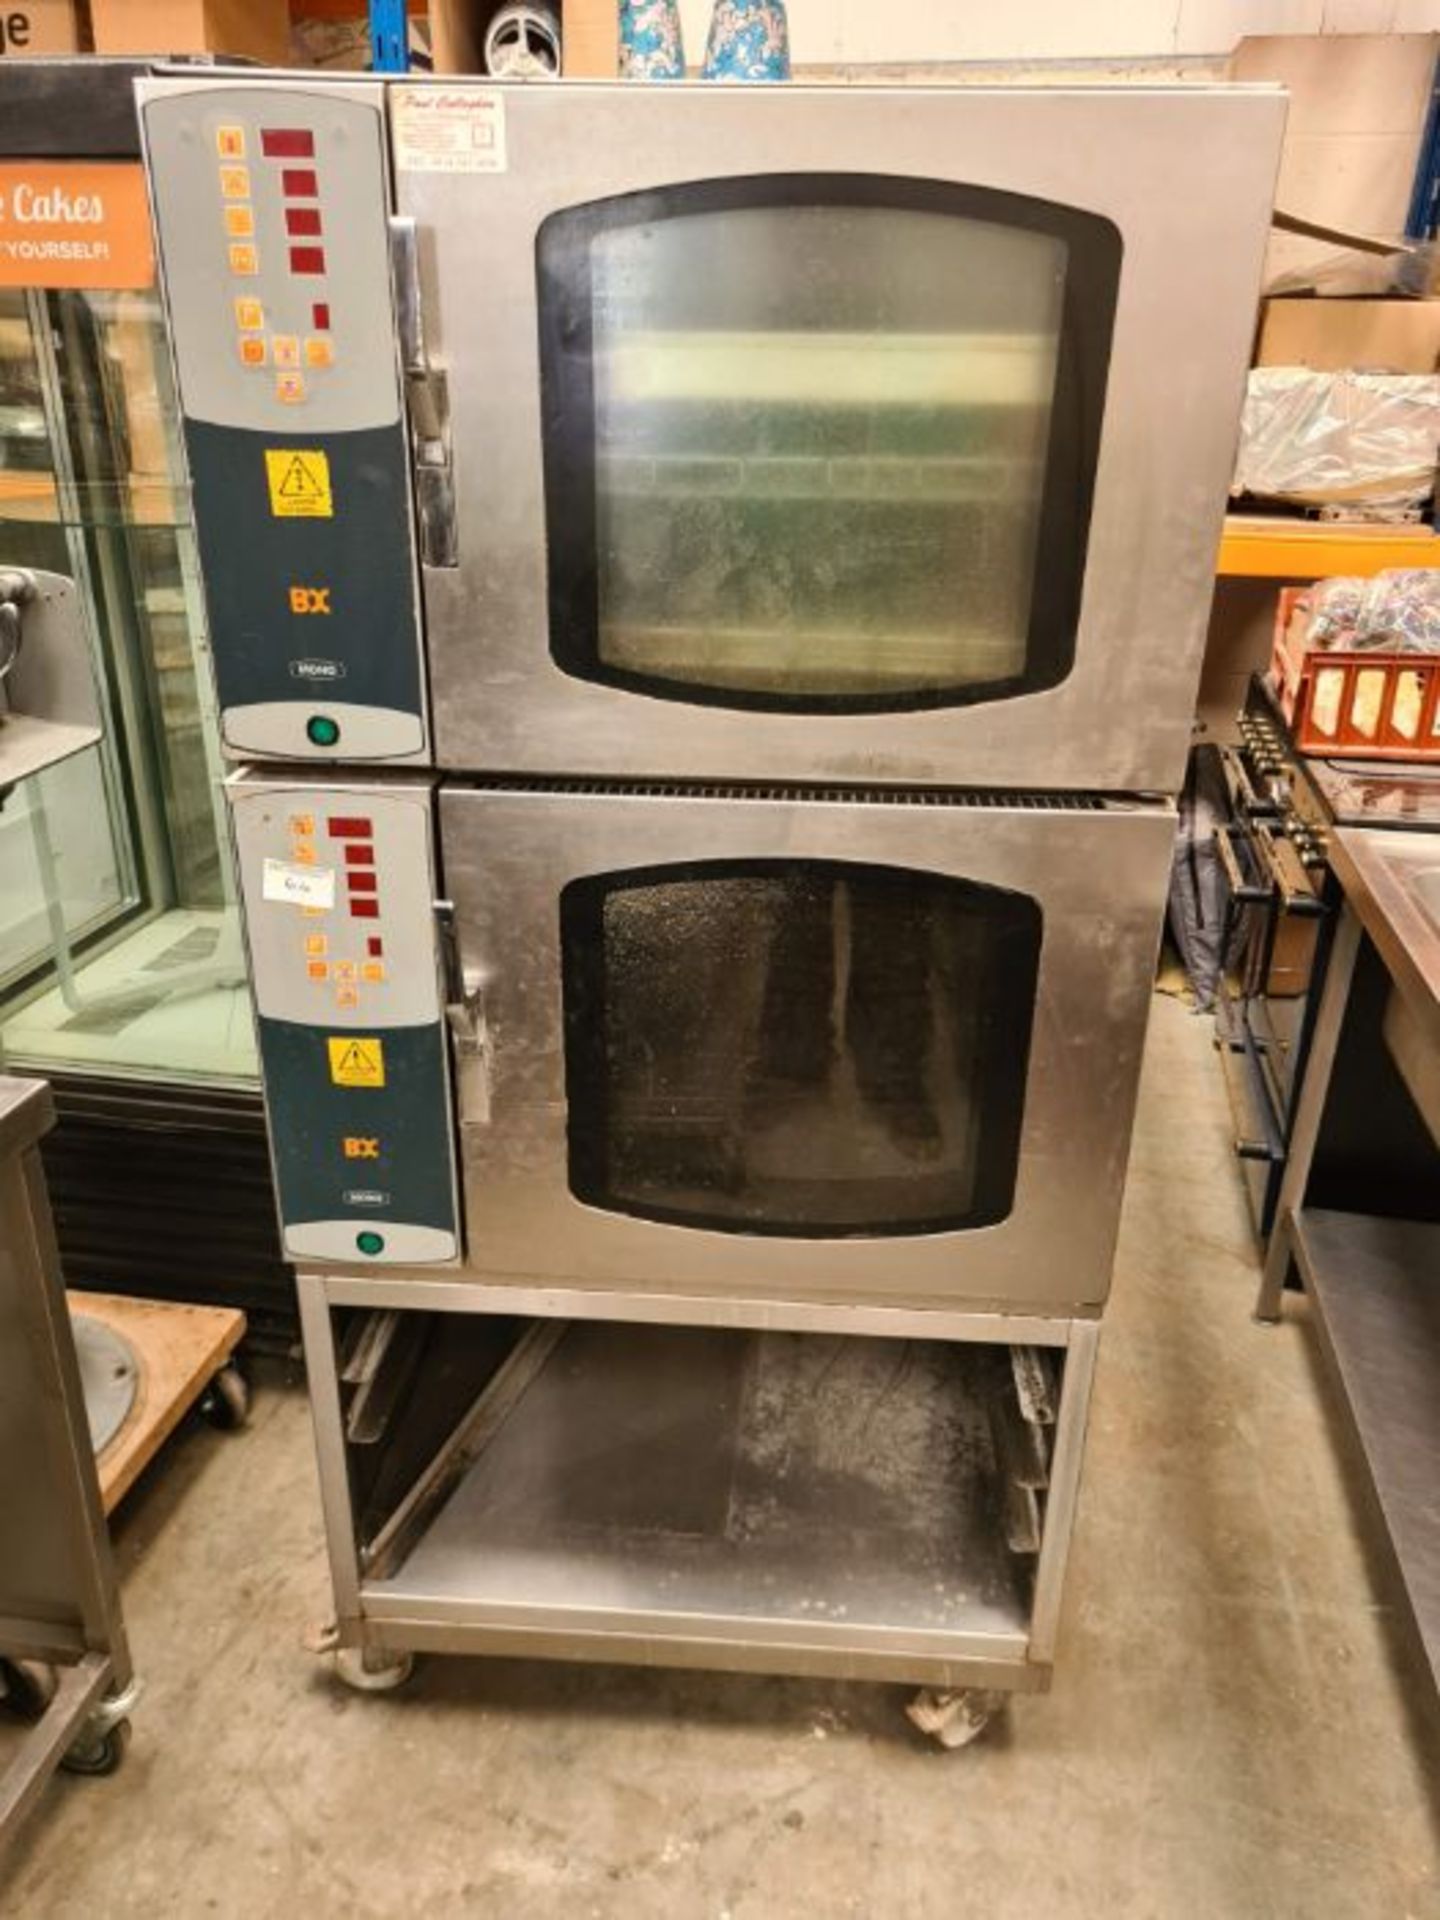 Mono BX double bakery oven, on stand with wheels.